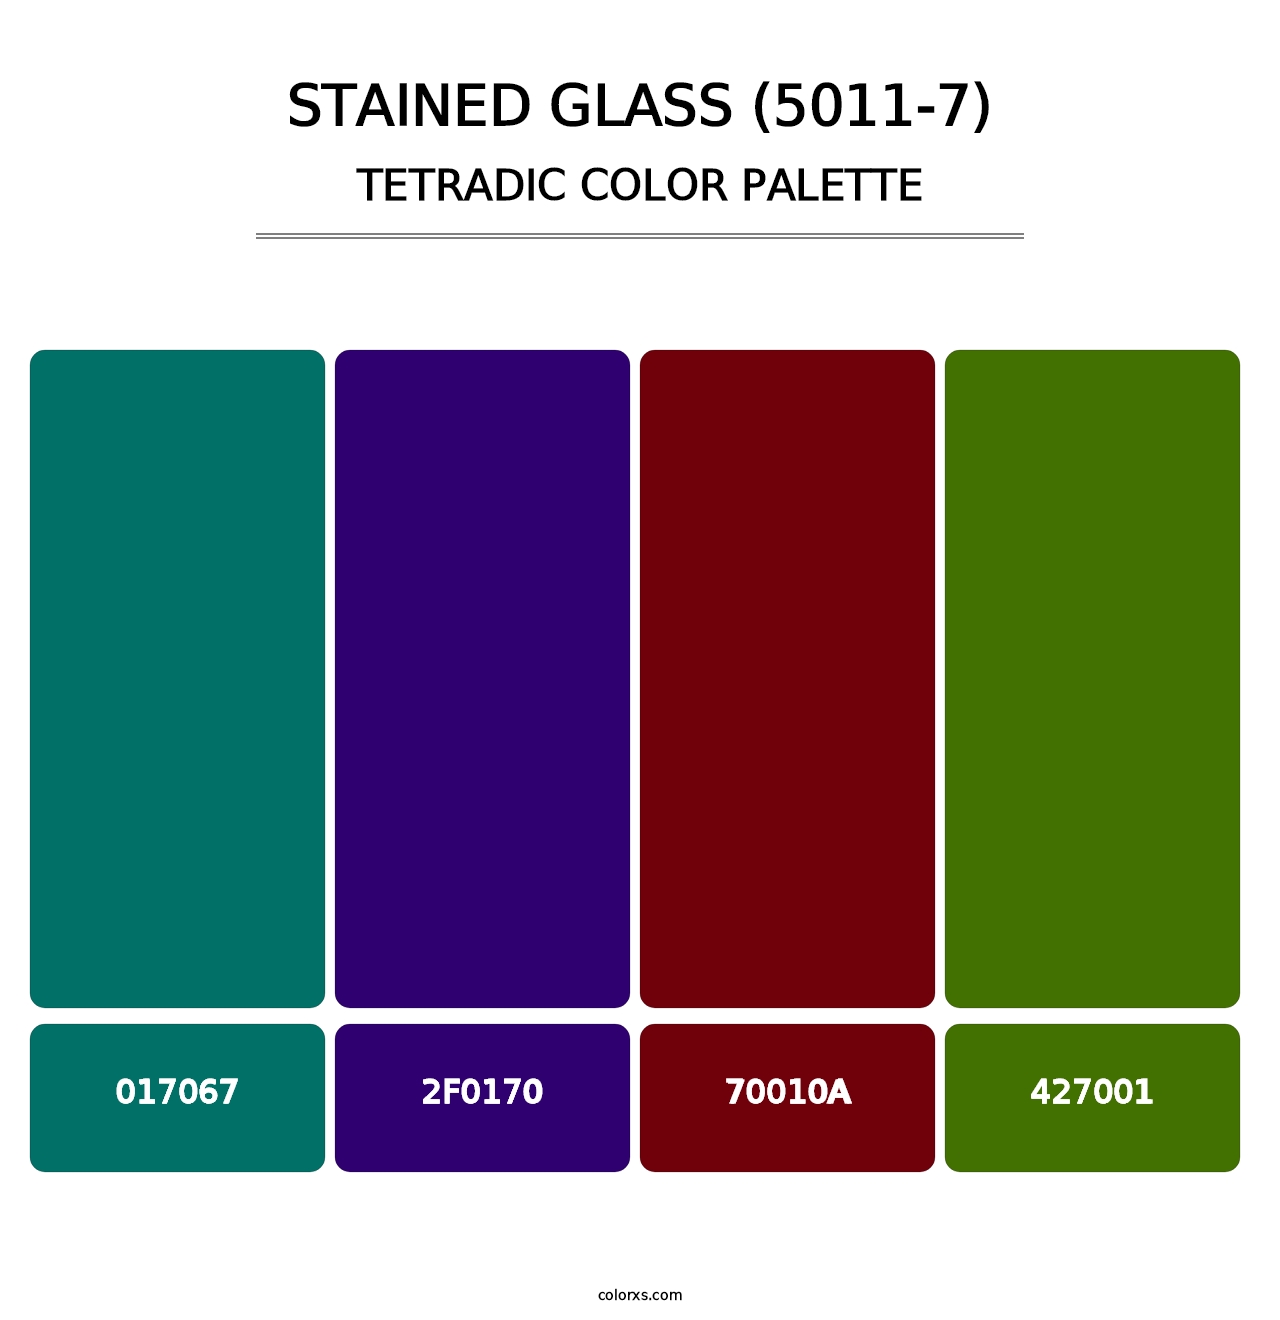 Stained Glass (5011-7) - Tetradic Color Palette